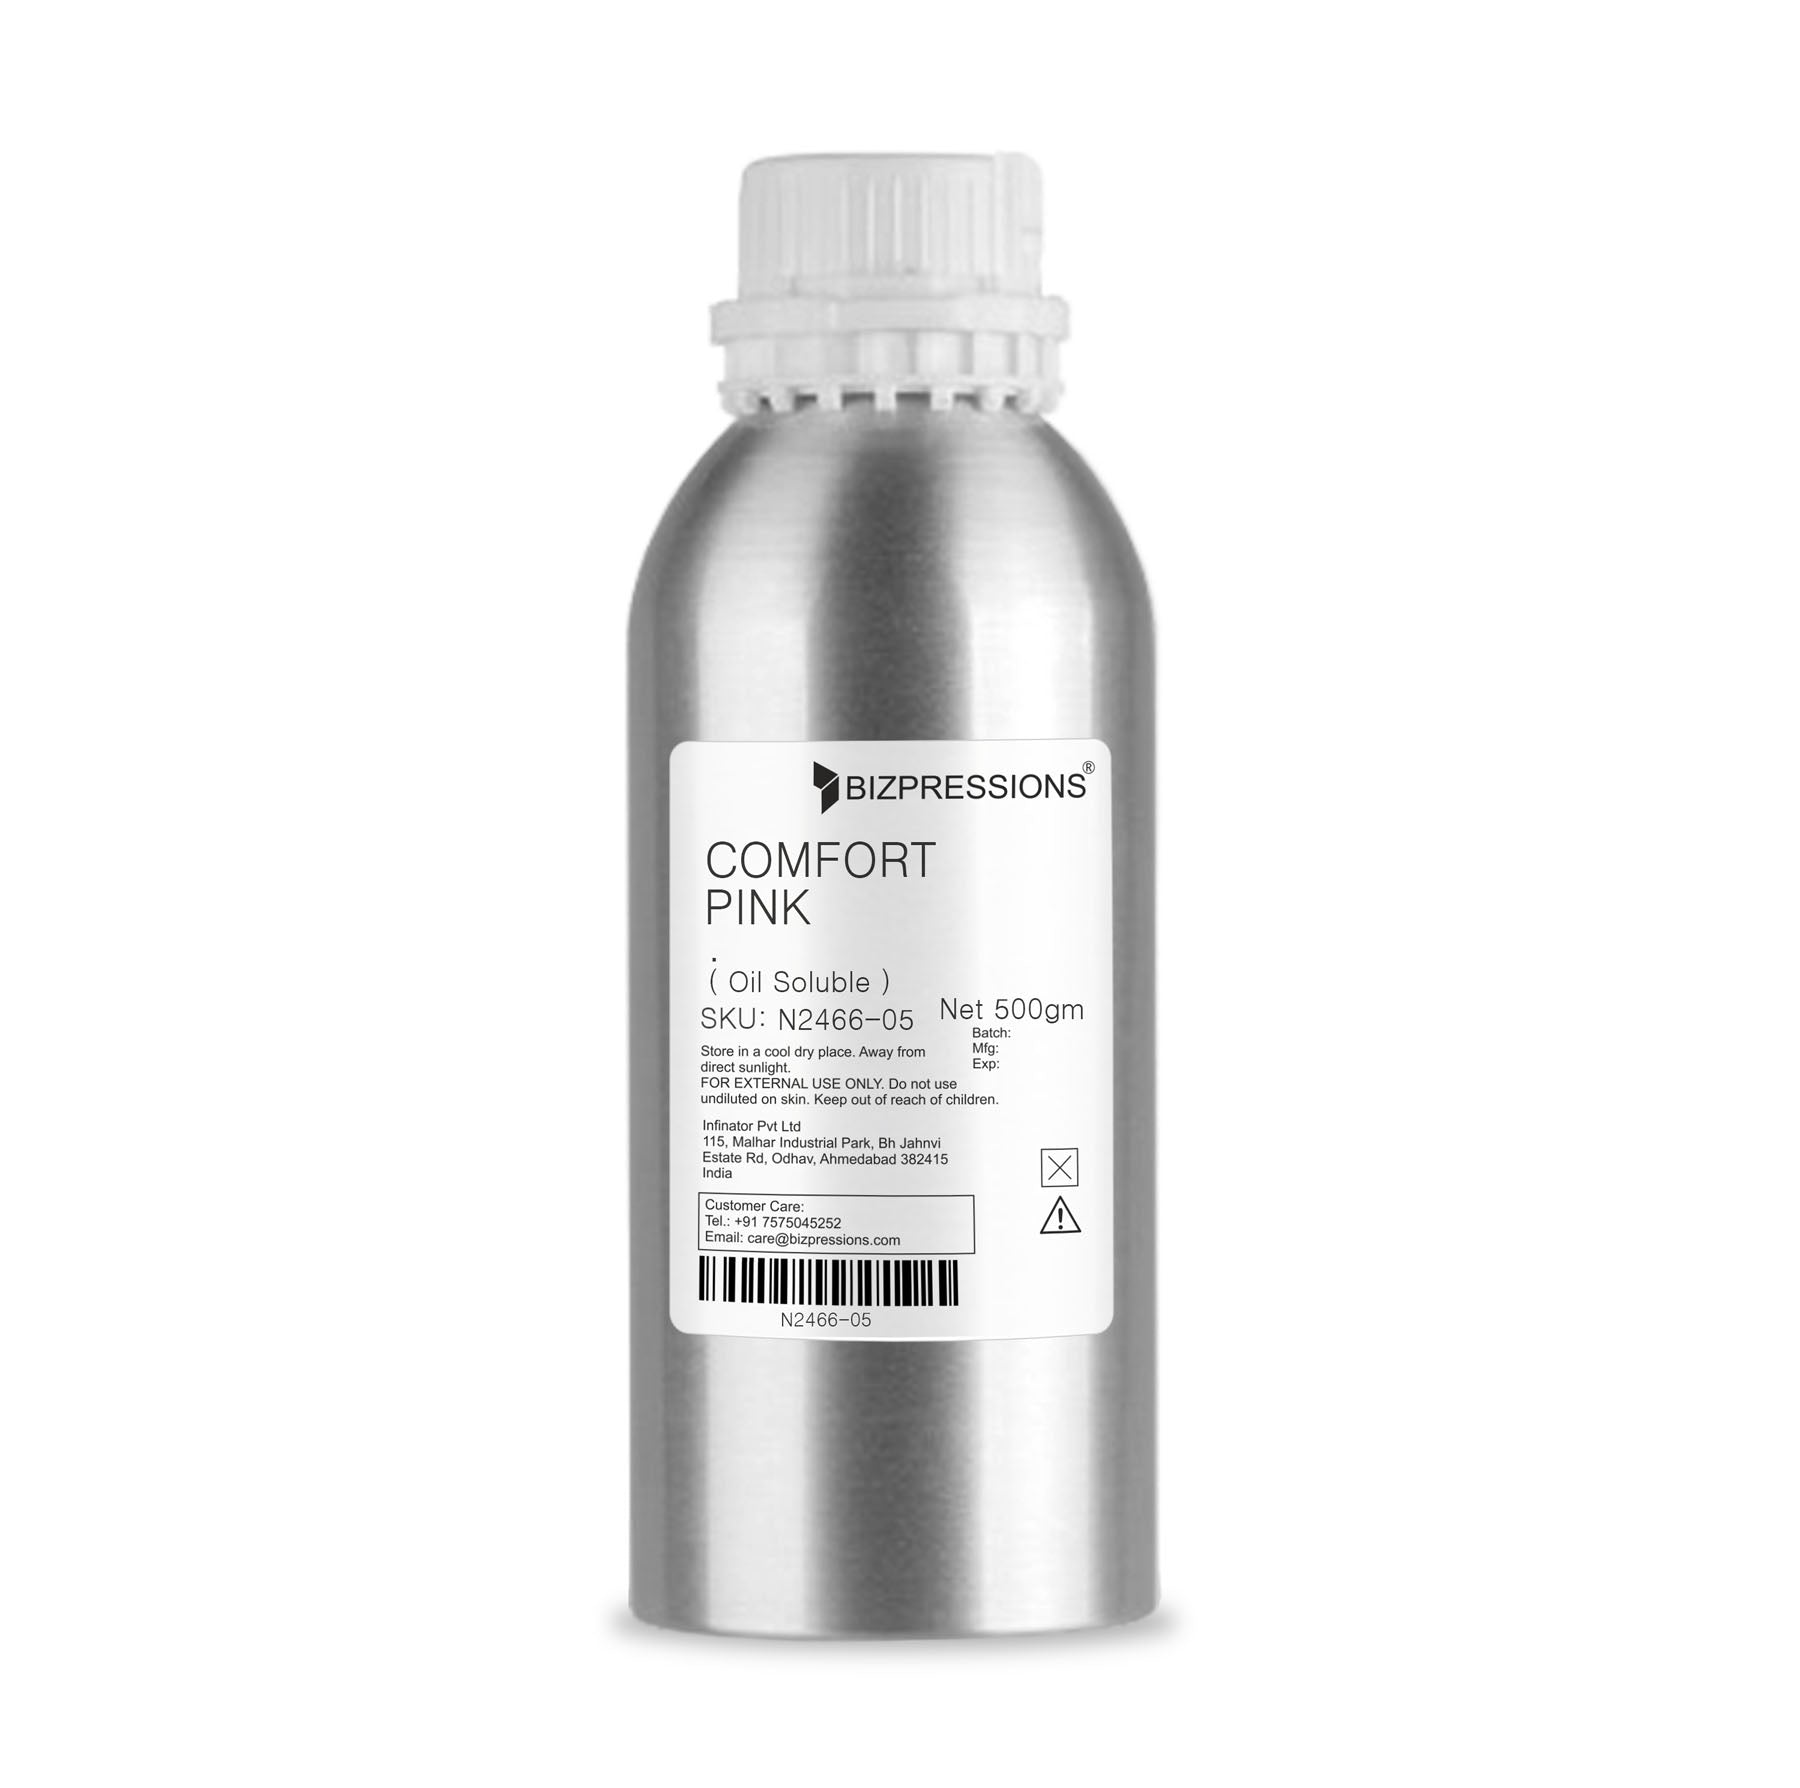 COMFORT PINK - Fragrance ( Oil Soluble ) - 500 gm